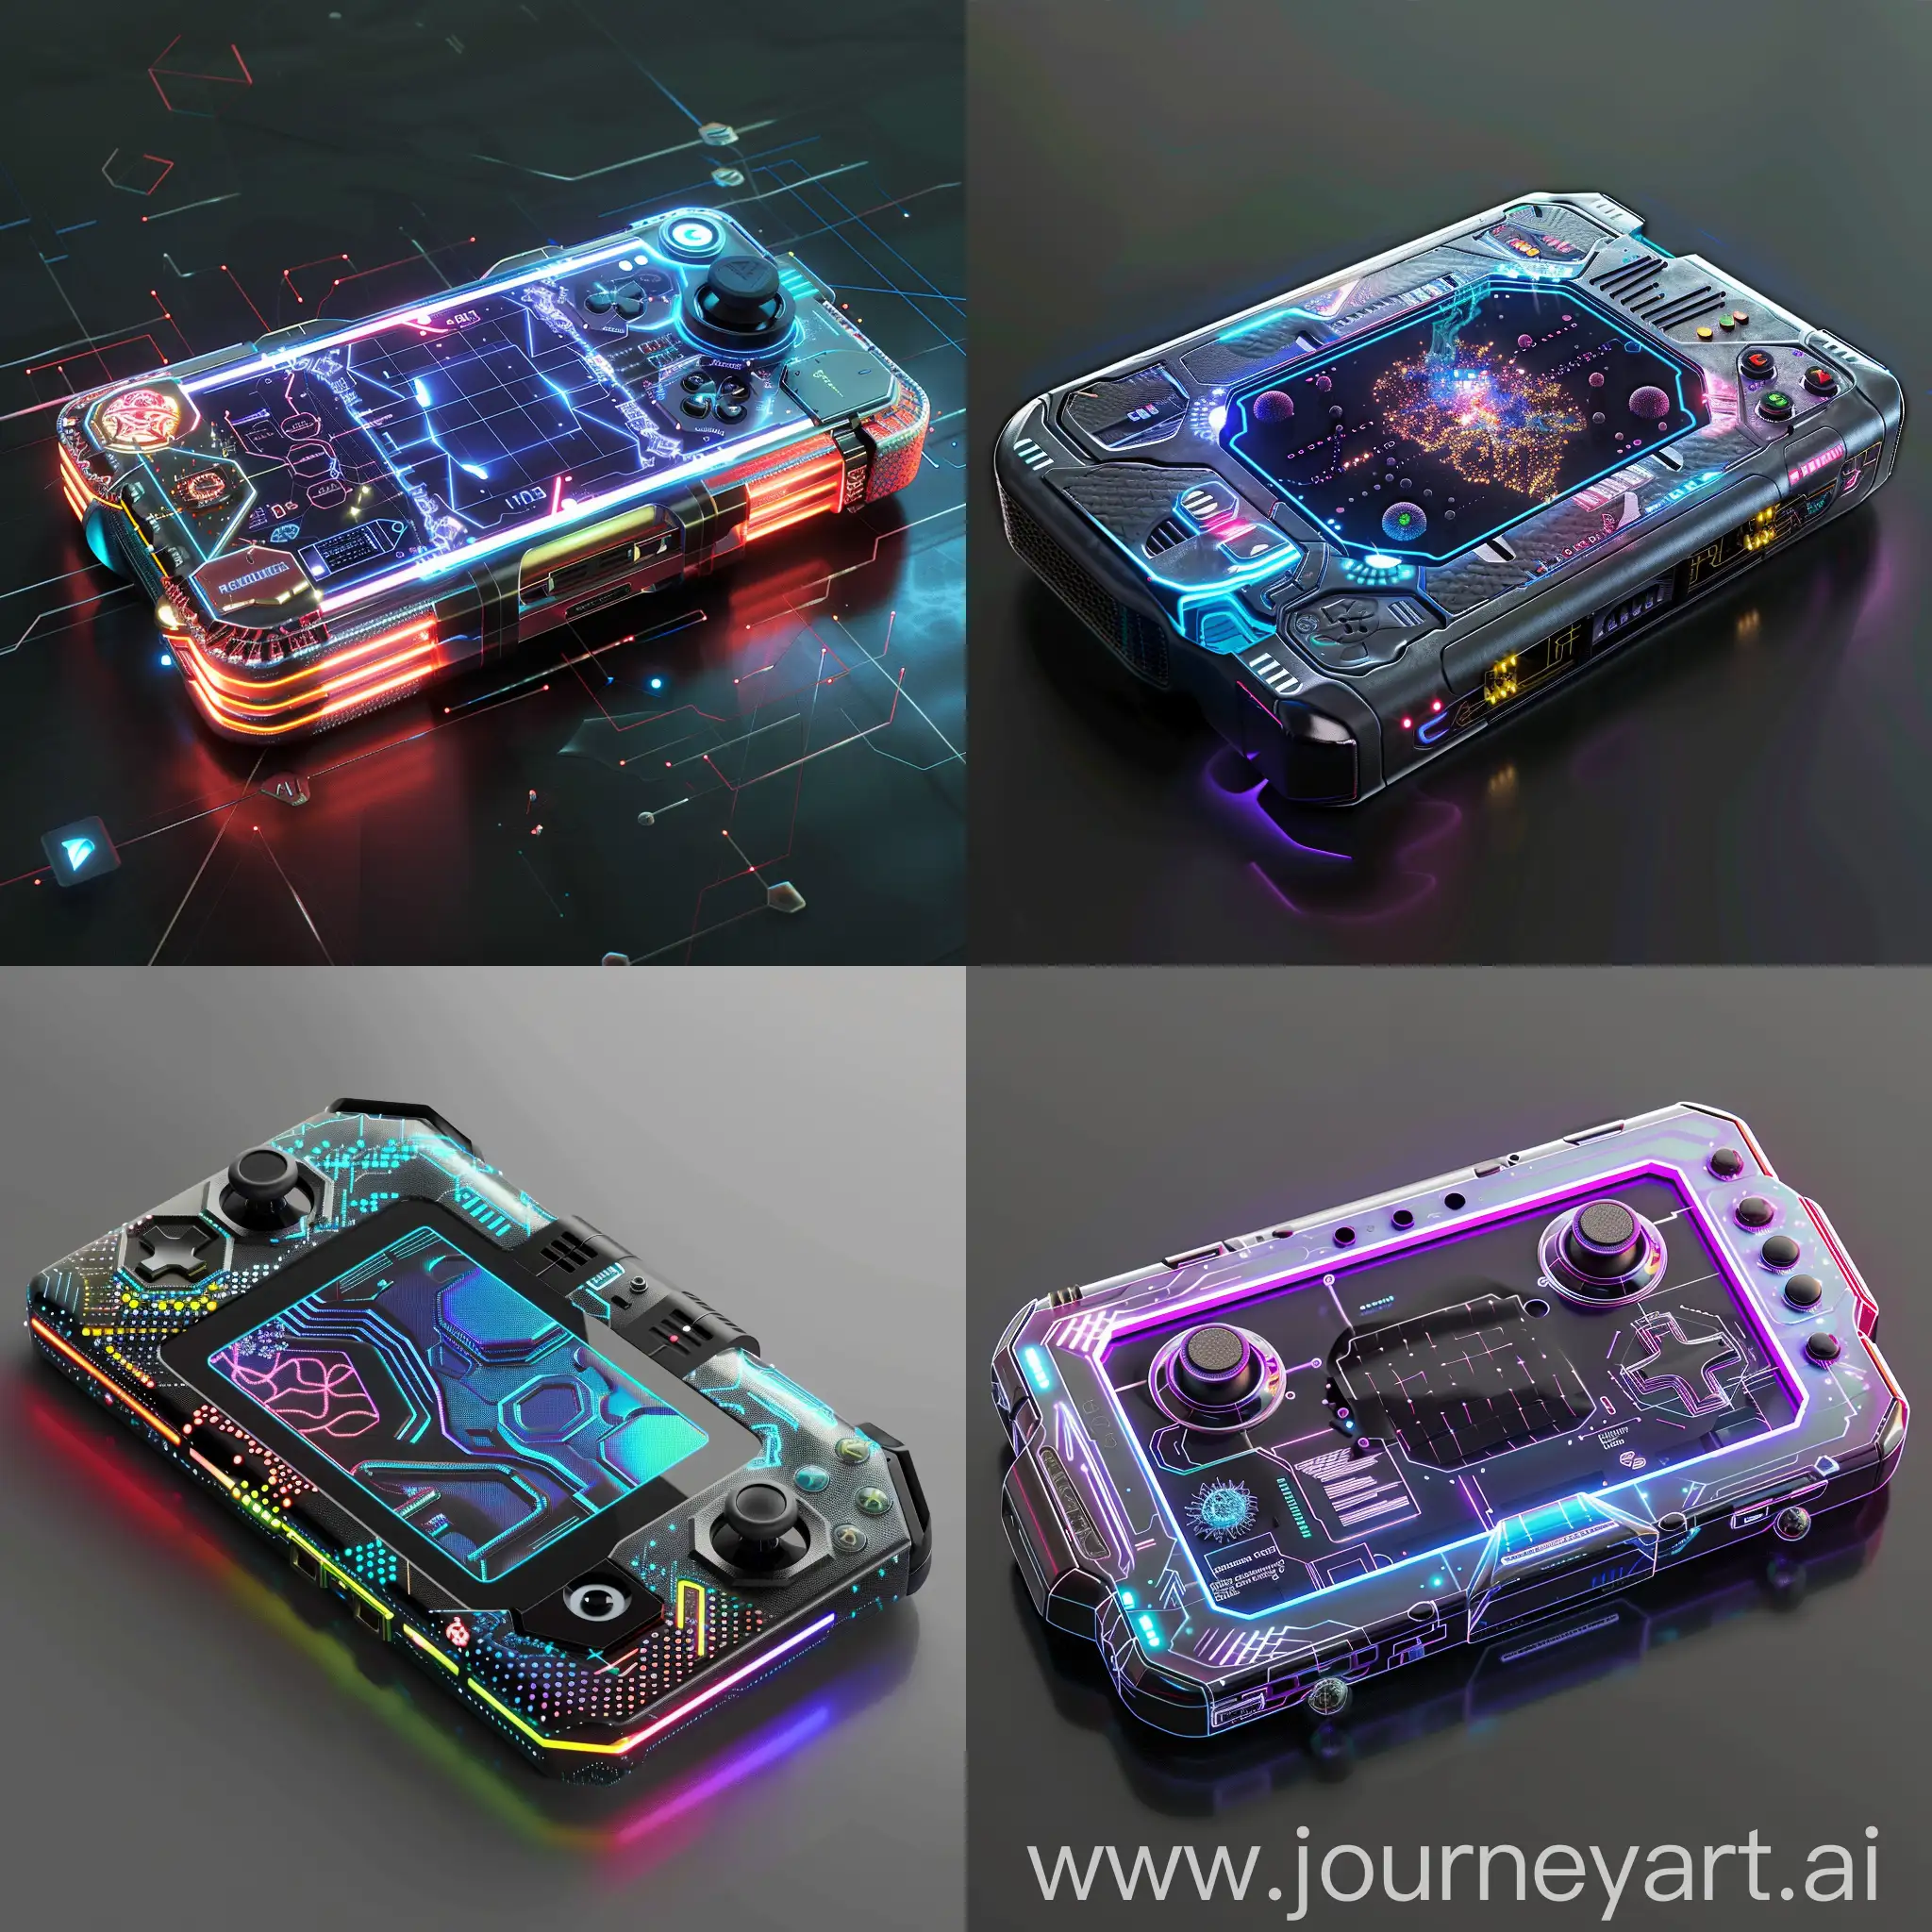 HighTech-Futuristic-Portable-Gaming-Console-with-Quantum-Processor-and-Holographic-Display